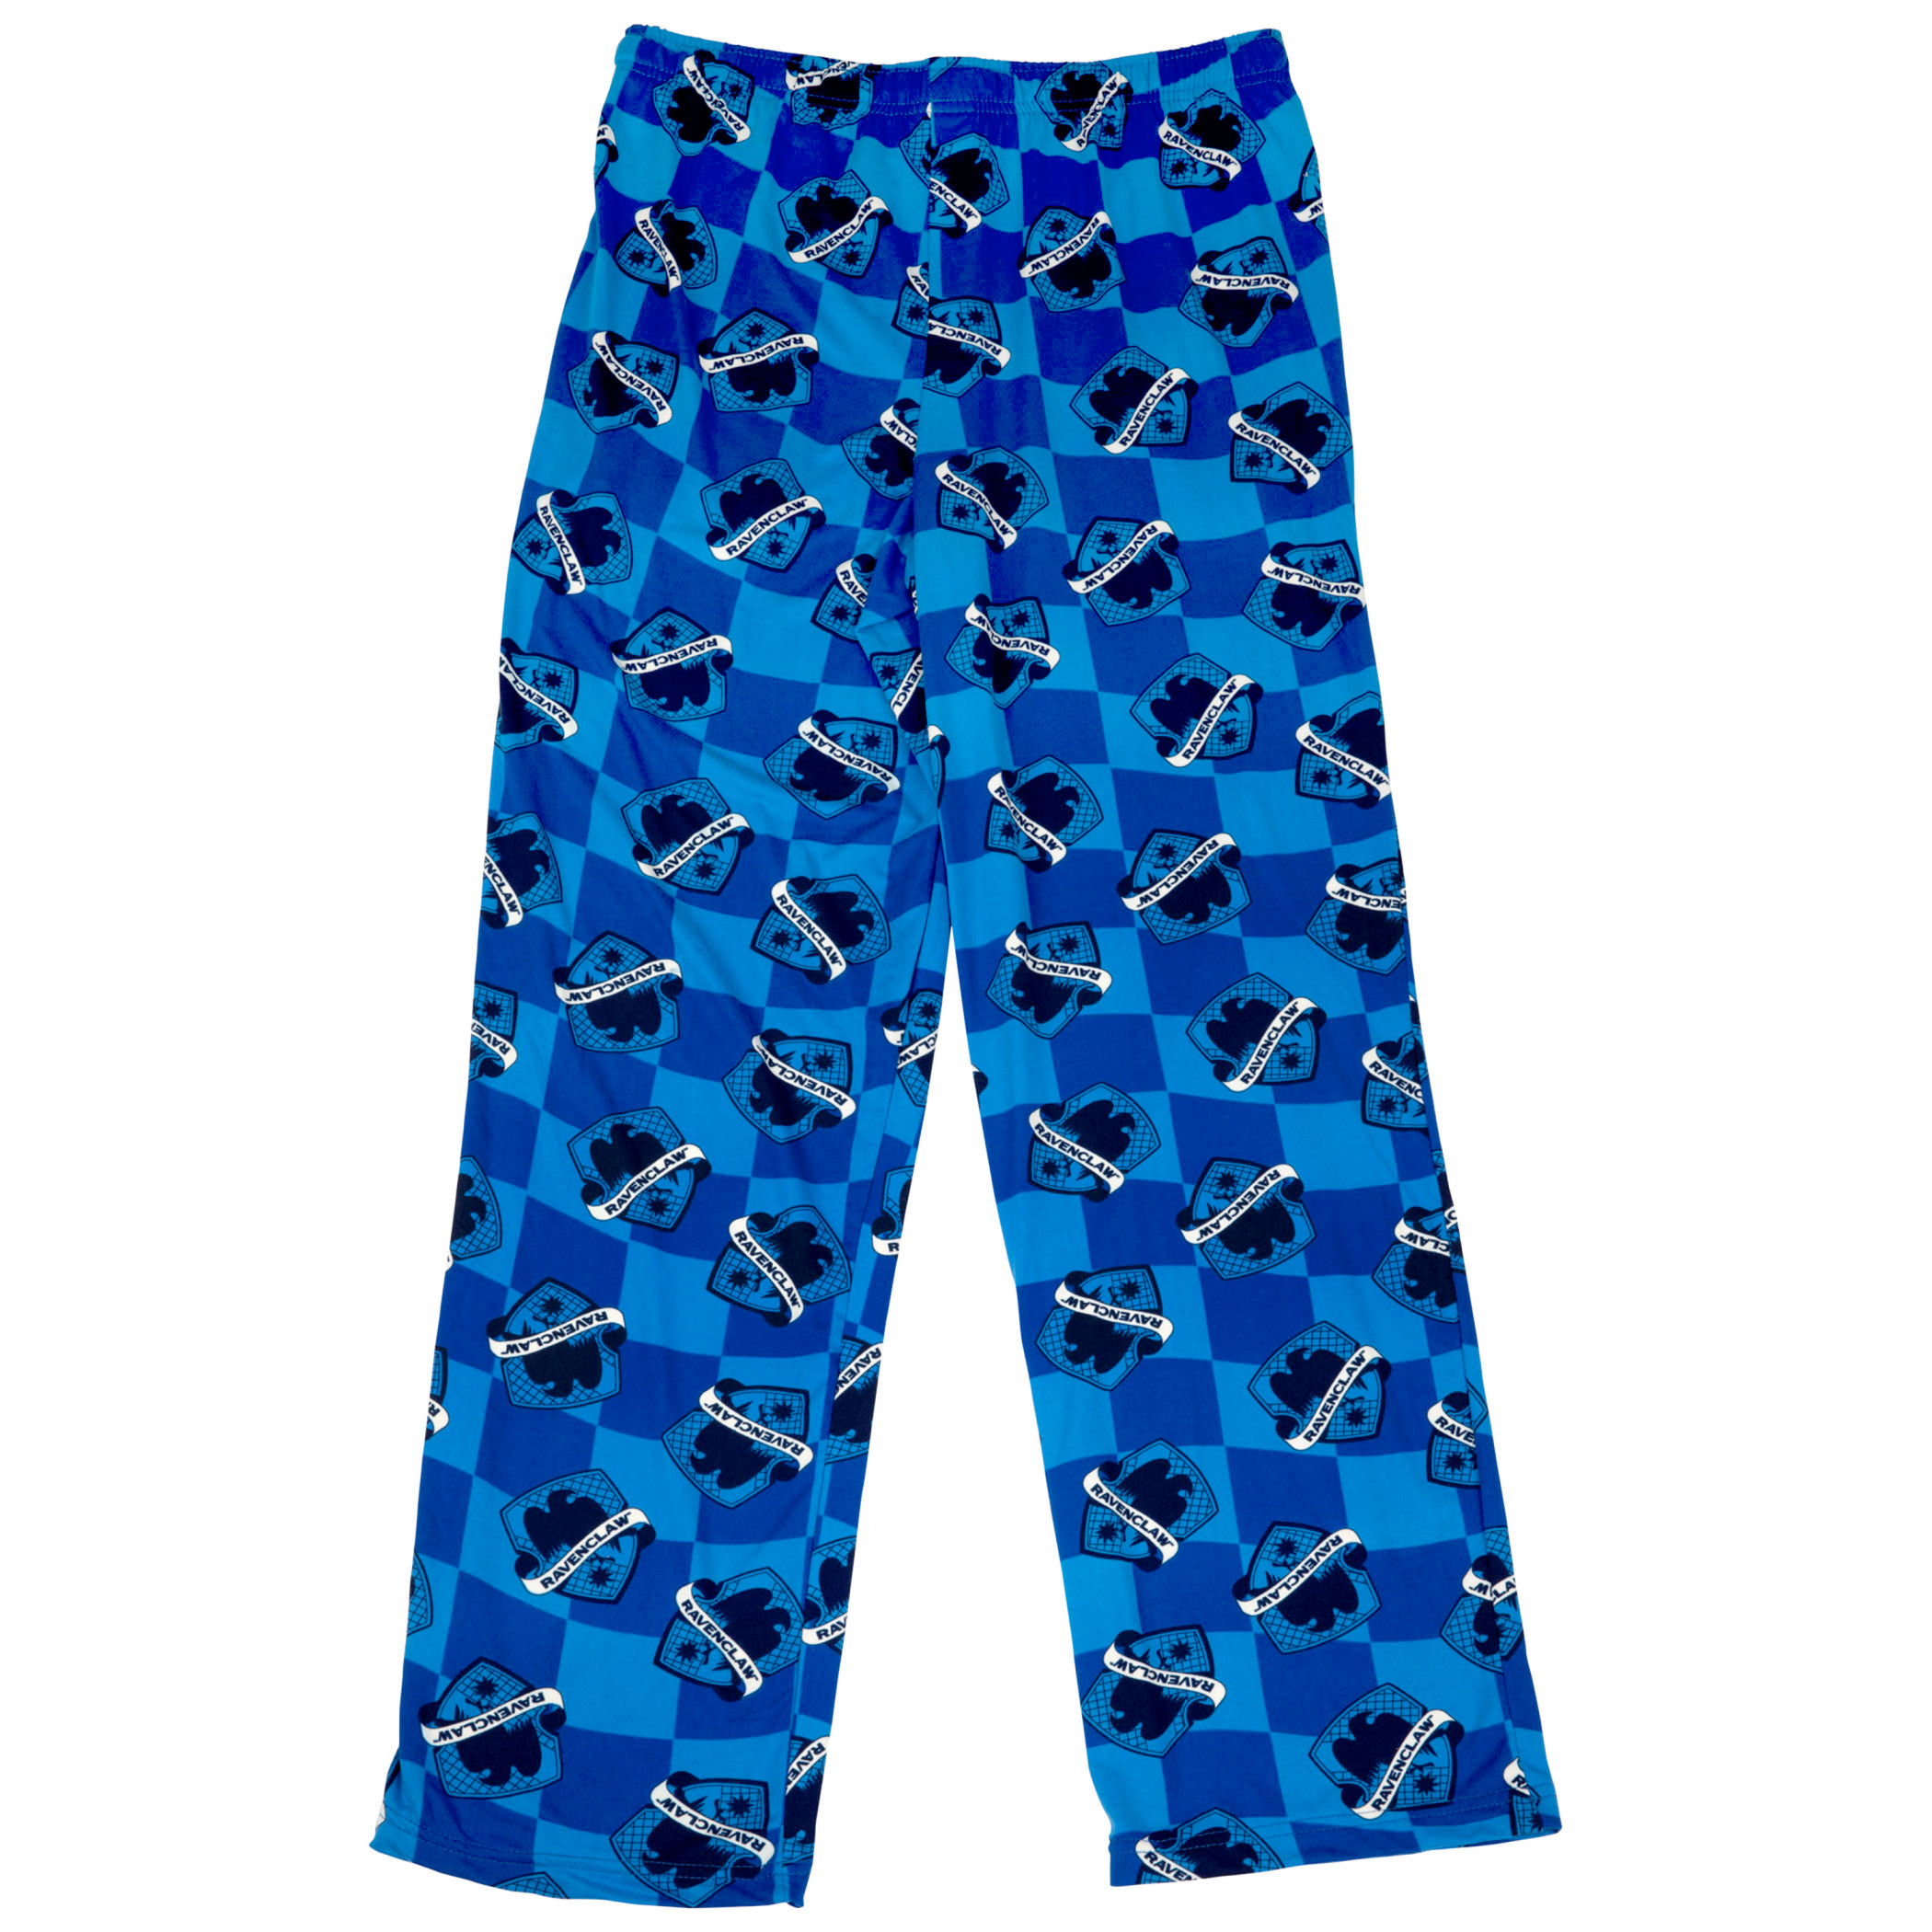 Harry Potter Ravenclaw House Crest Checkered Sleep Pants